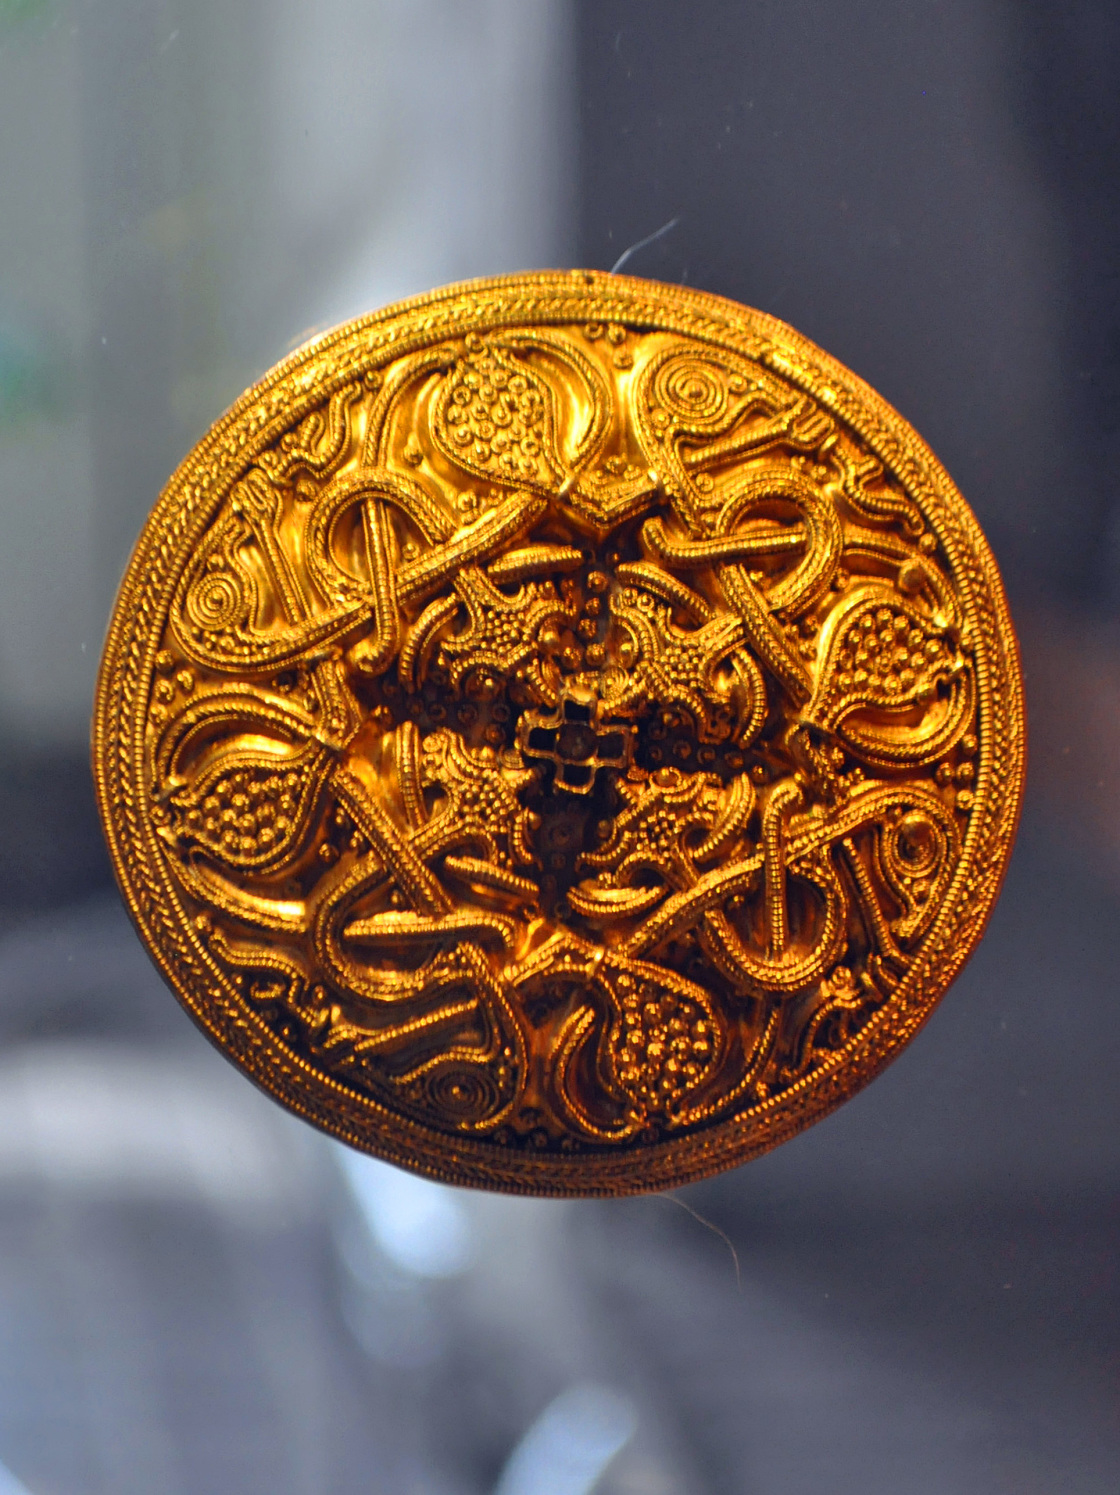 The picture shows jewellery from the Viking Age - enlarged view